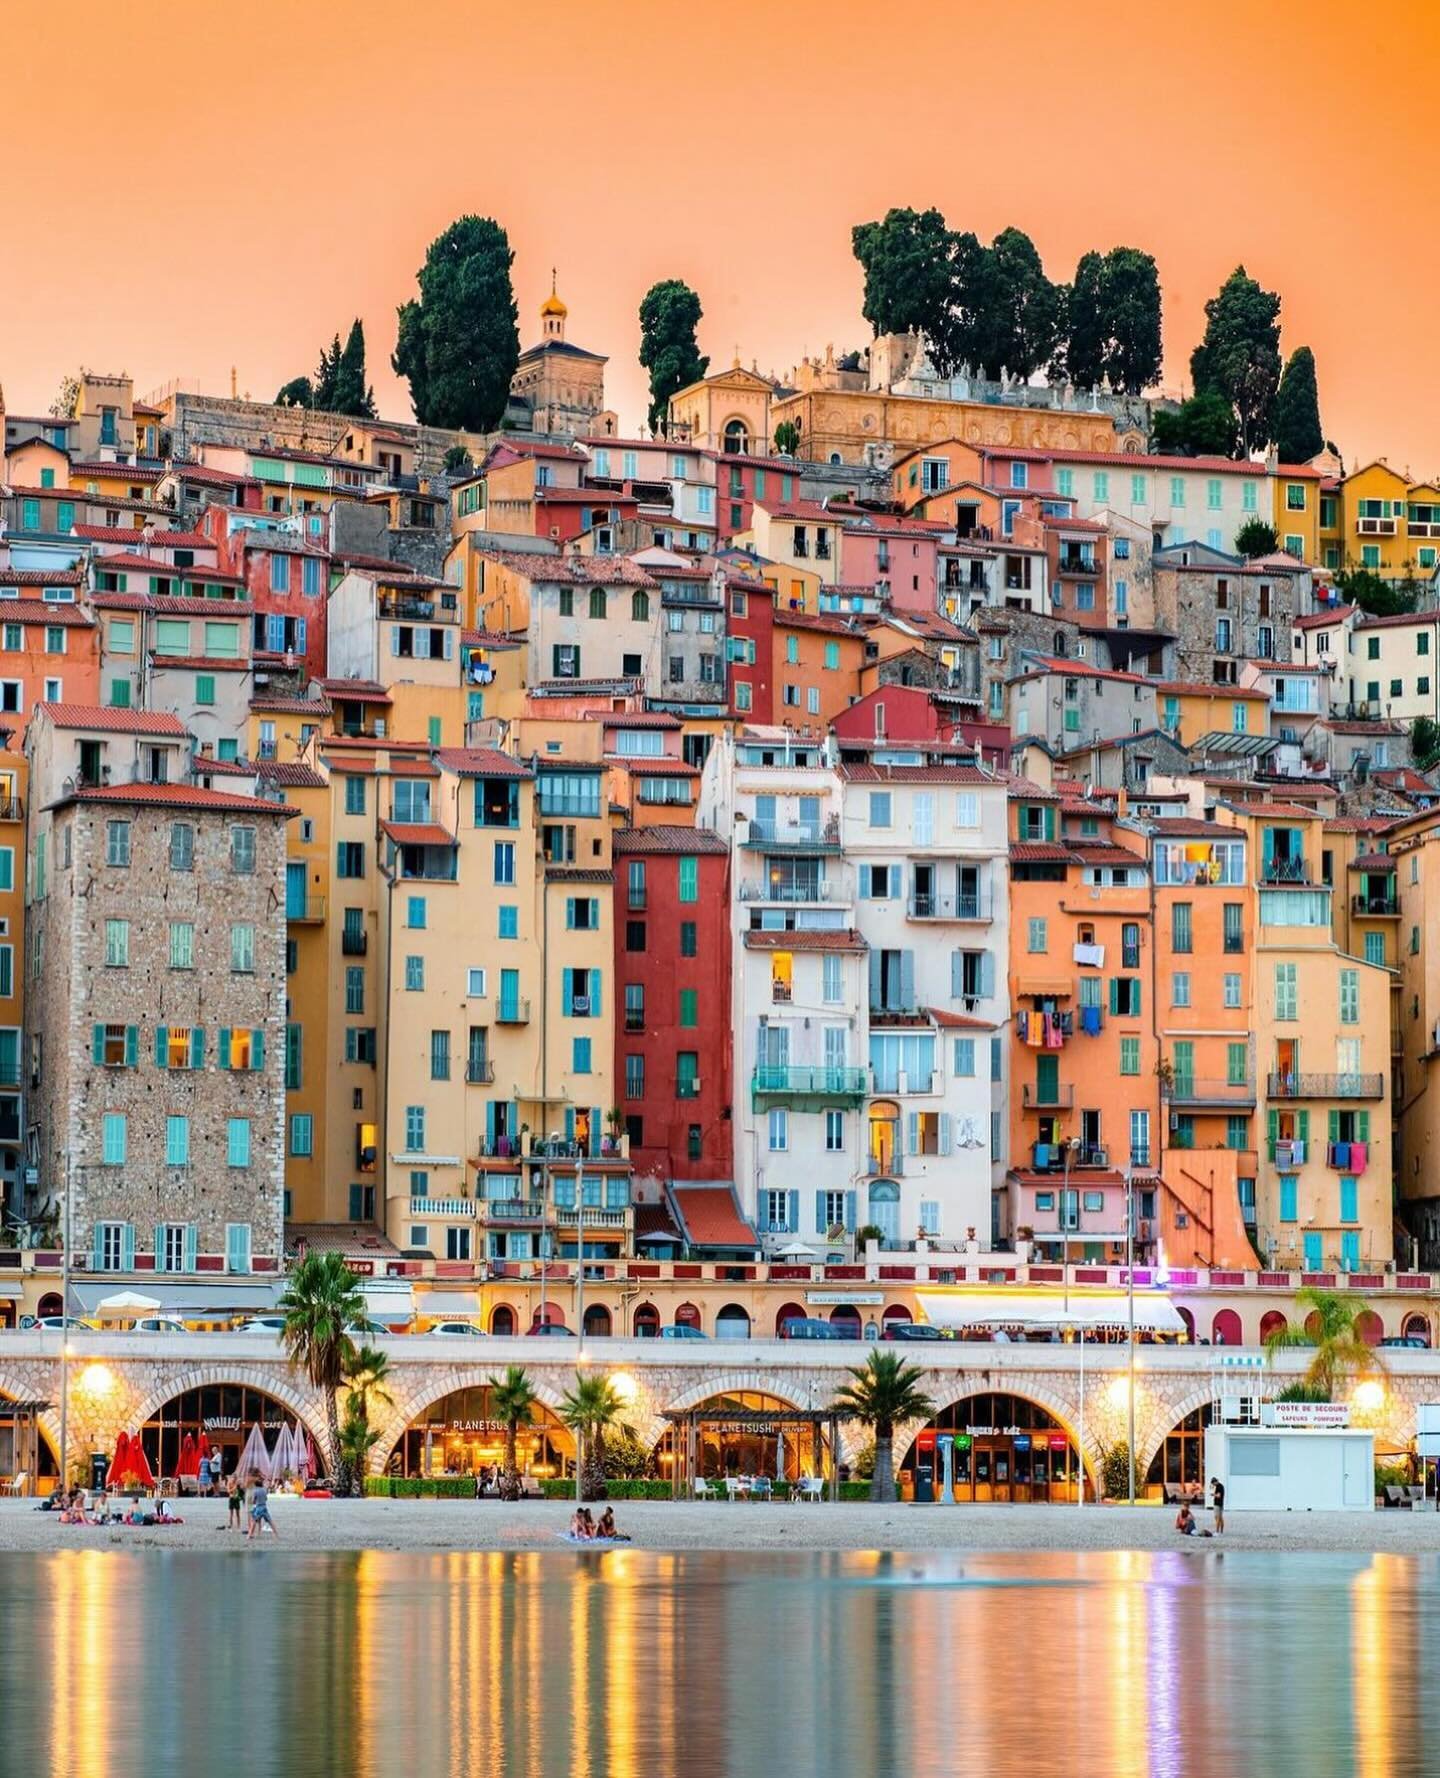 Considered one of France&rsquo;s best-kept secrets and the &lsquo;pearl&rsquo; of the Riviera ~ Menton, France is a less publicized but equally lustrous destination, as compared to its more recognized coastline companions. Known for its beaches, gard